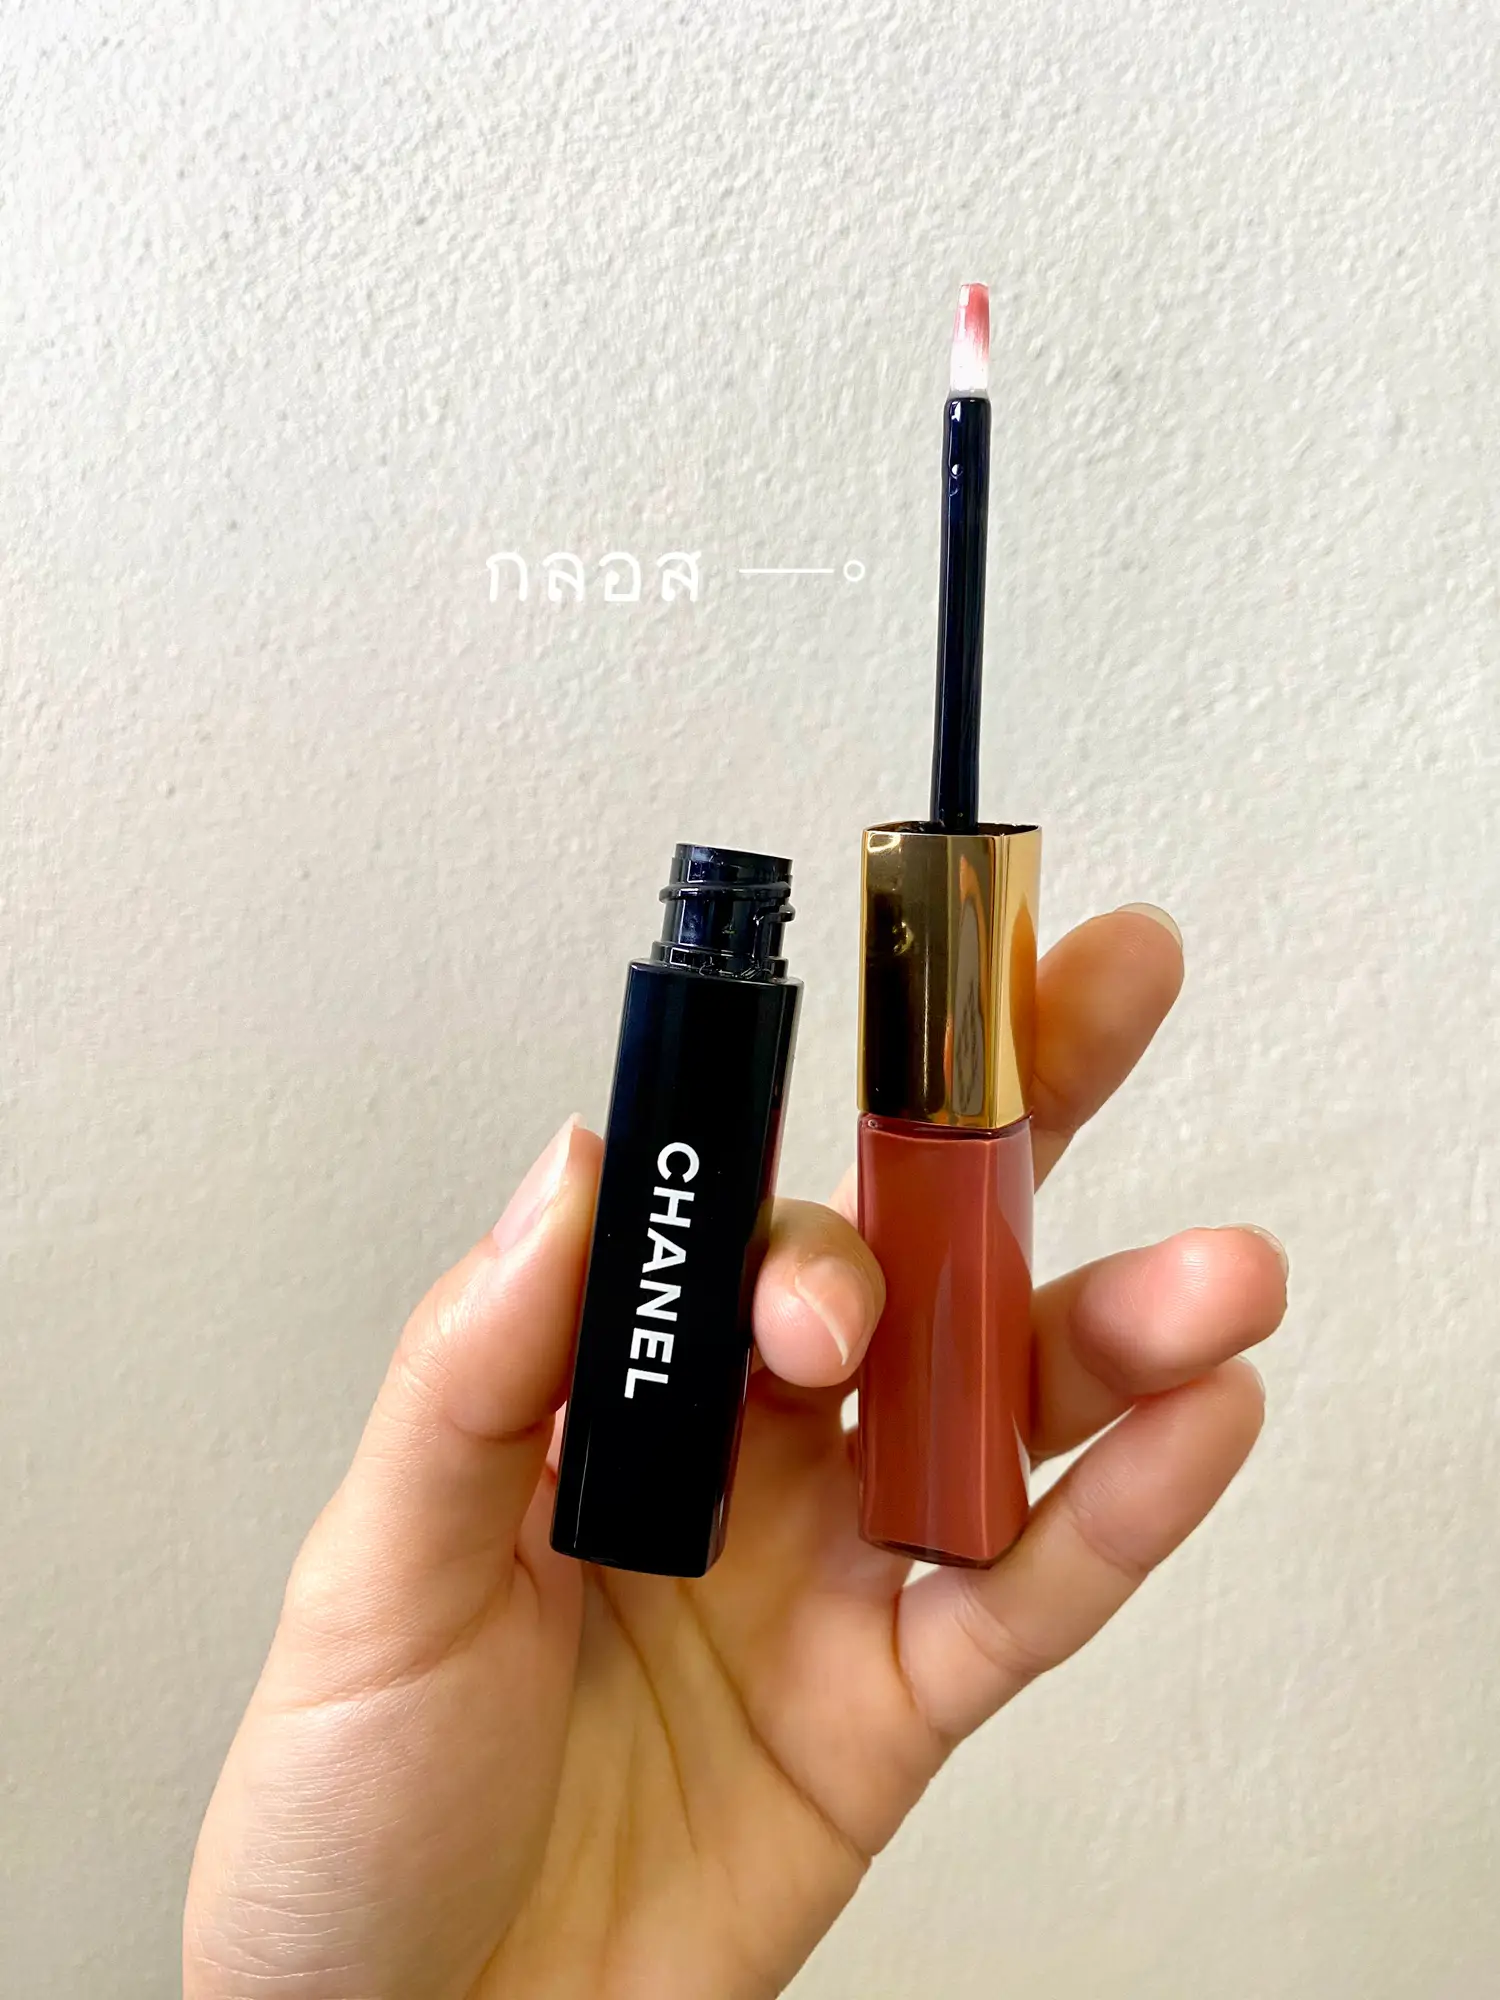 CHANEL LE ROUGE DUO ULTRA TEN 💖 LIP THAT SHOULD WITH POCKET, Gallery  posted by Maiipoint